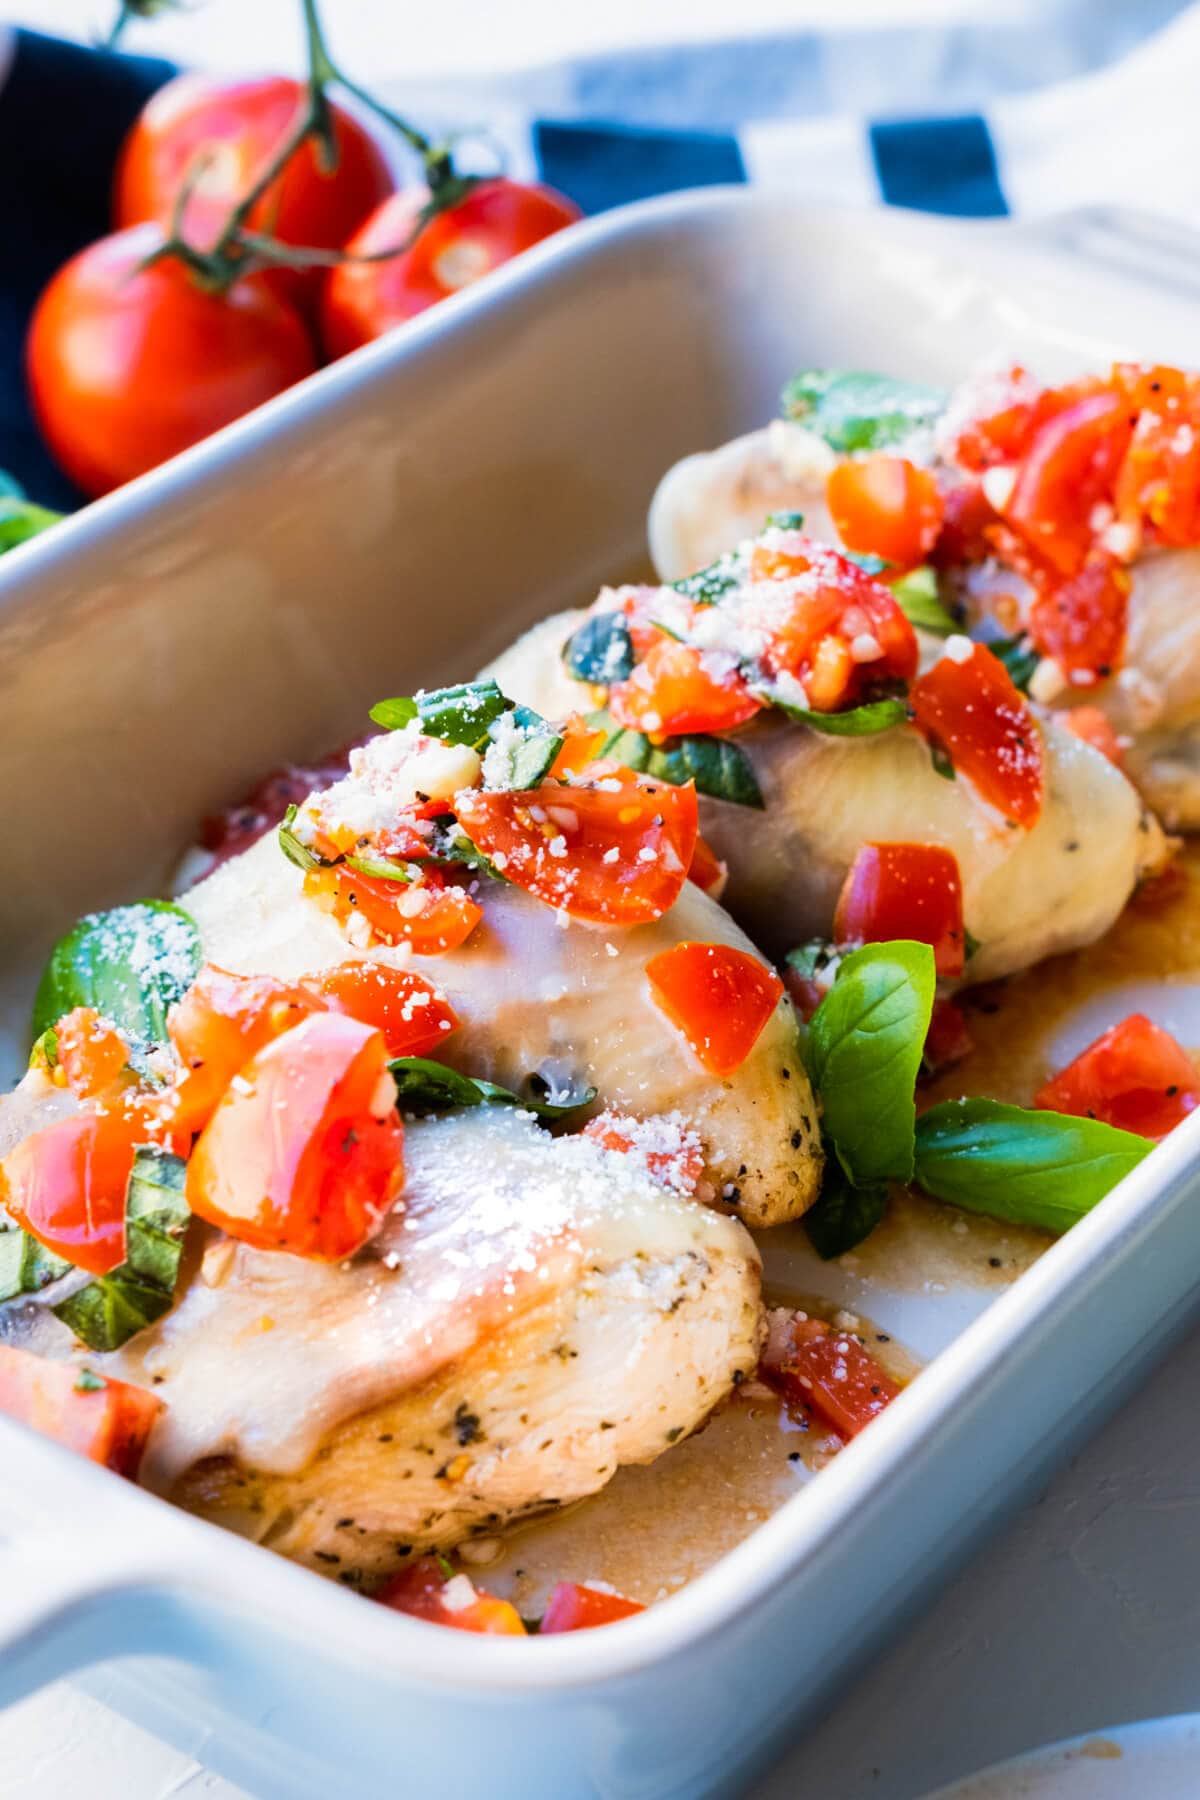 Chicken breast covered with melting cheese and served in a rectangular dish with chopped tomatoes and basil leaves.